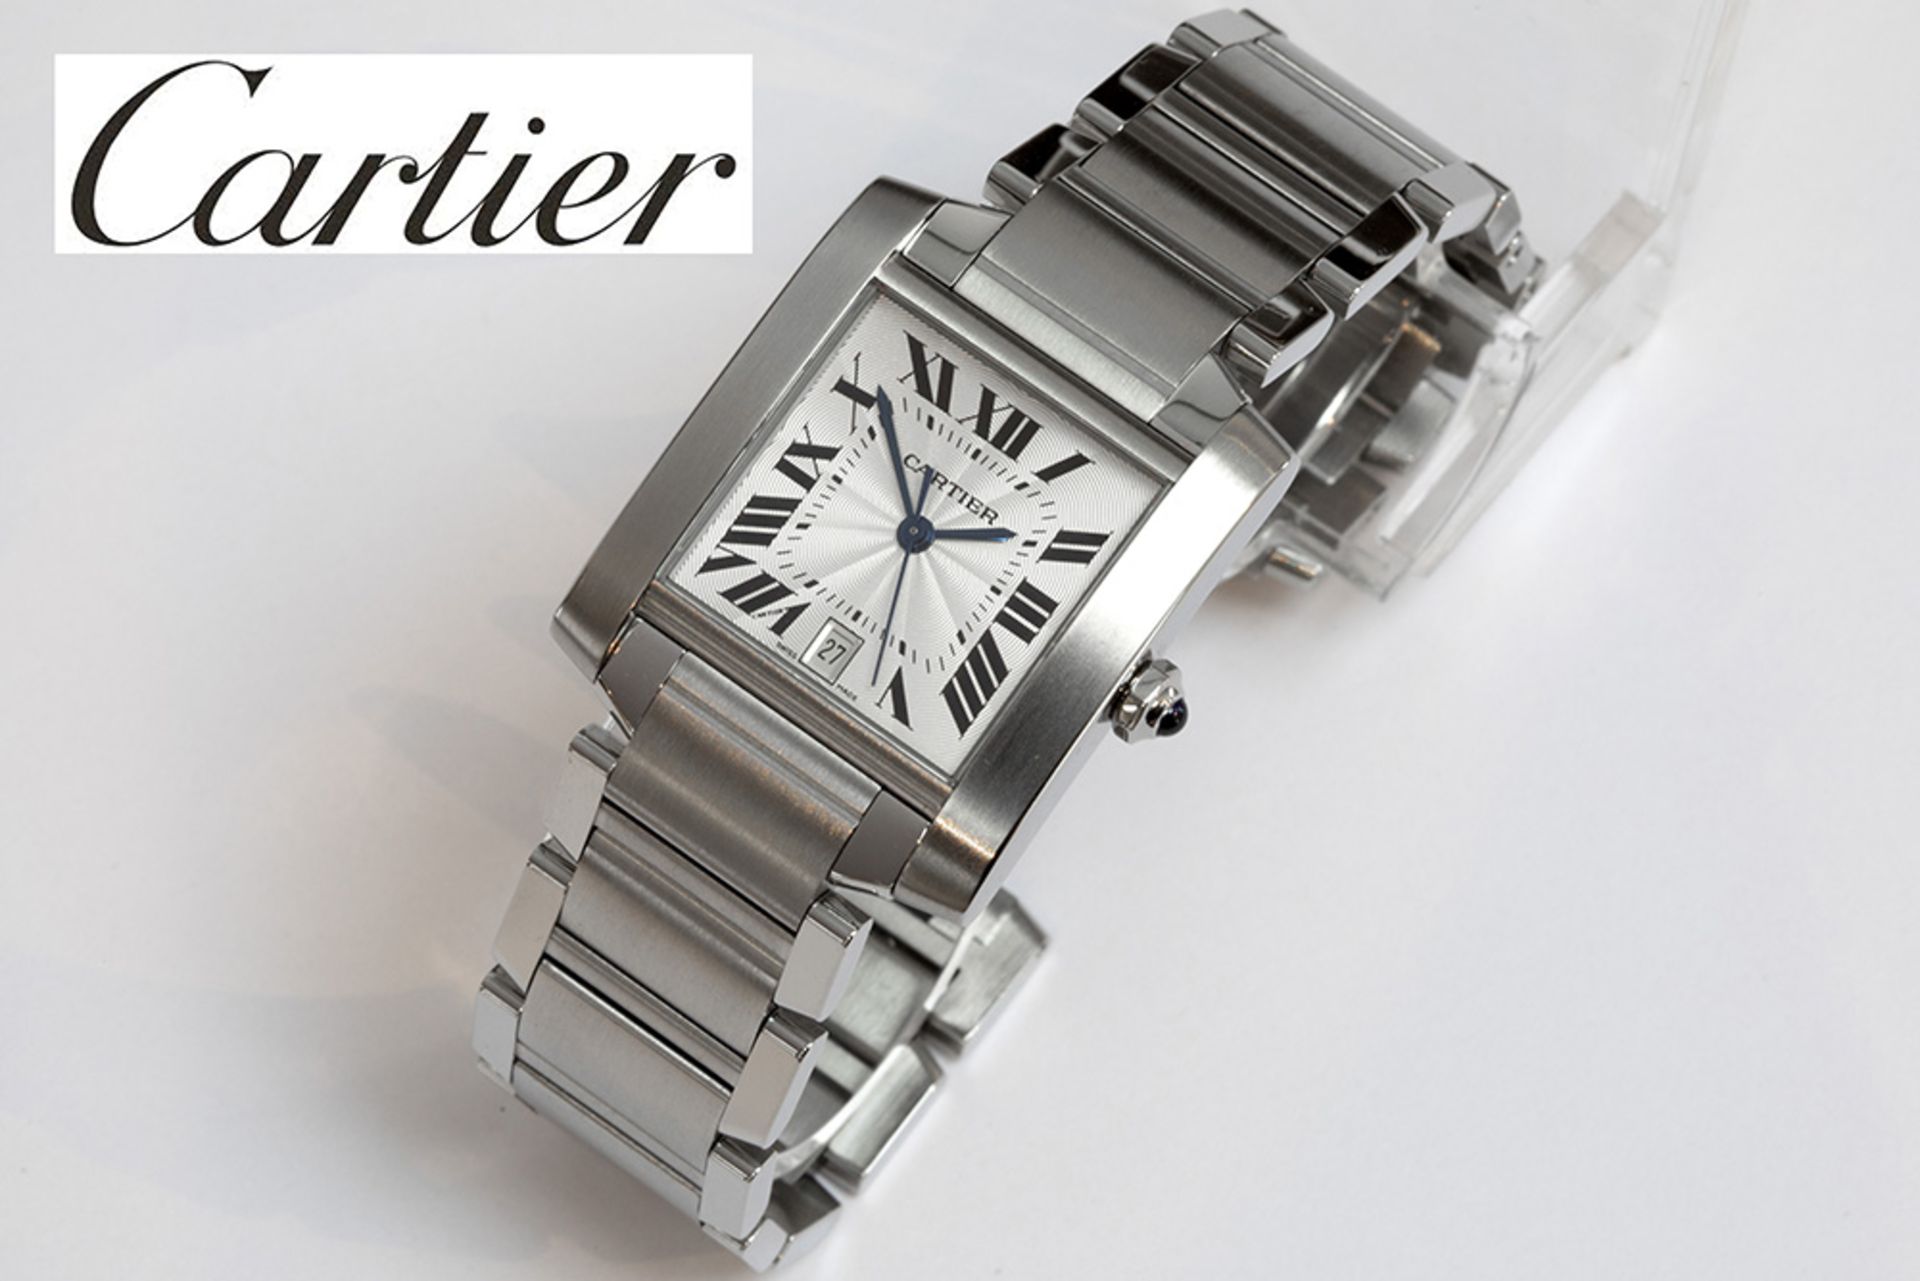 completely original automatique "Cartier Tank française" wristwatch in steel - with its box